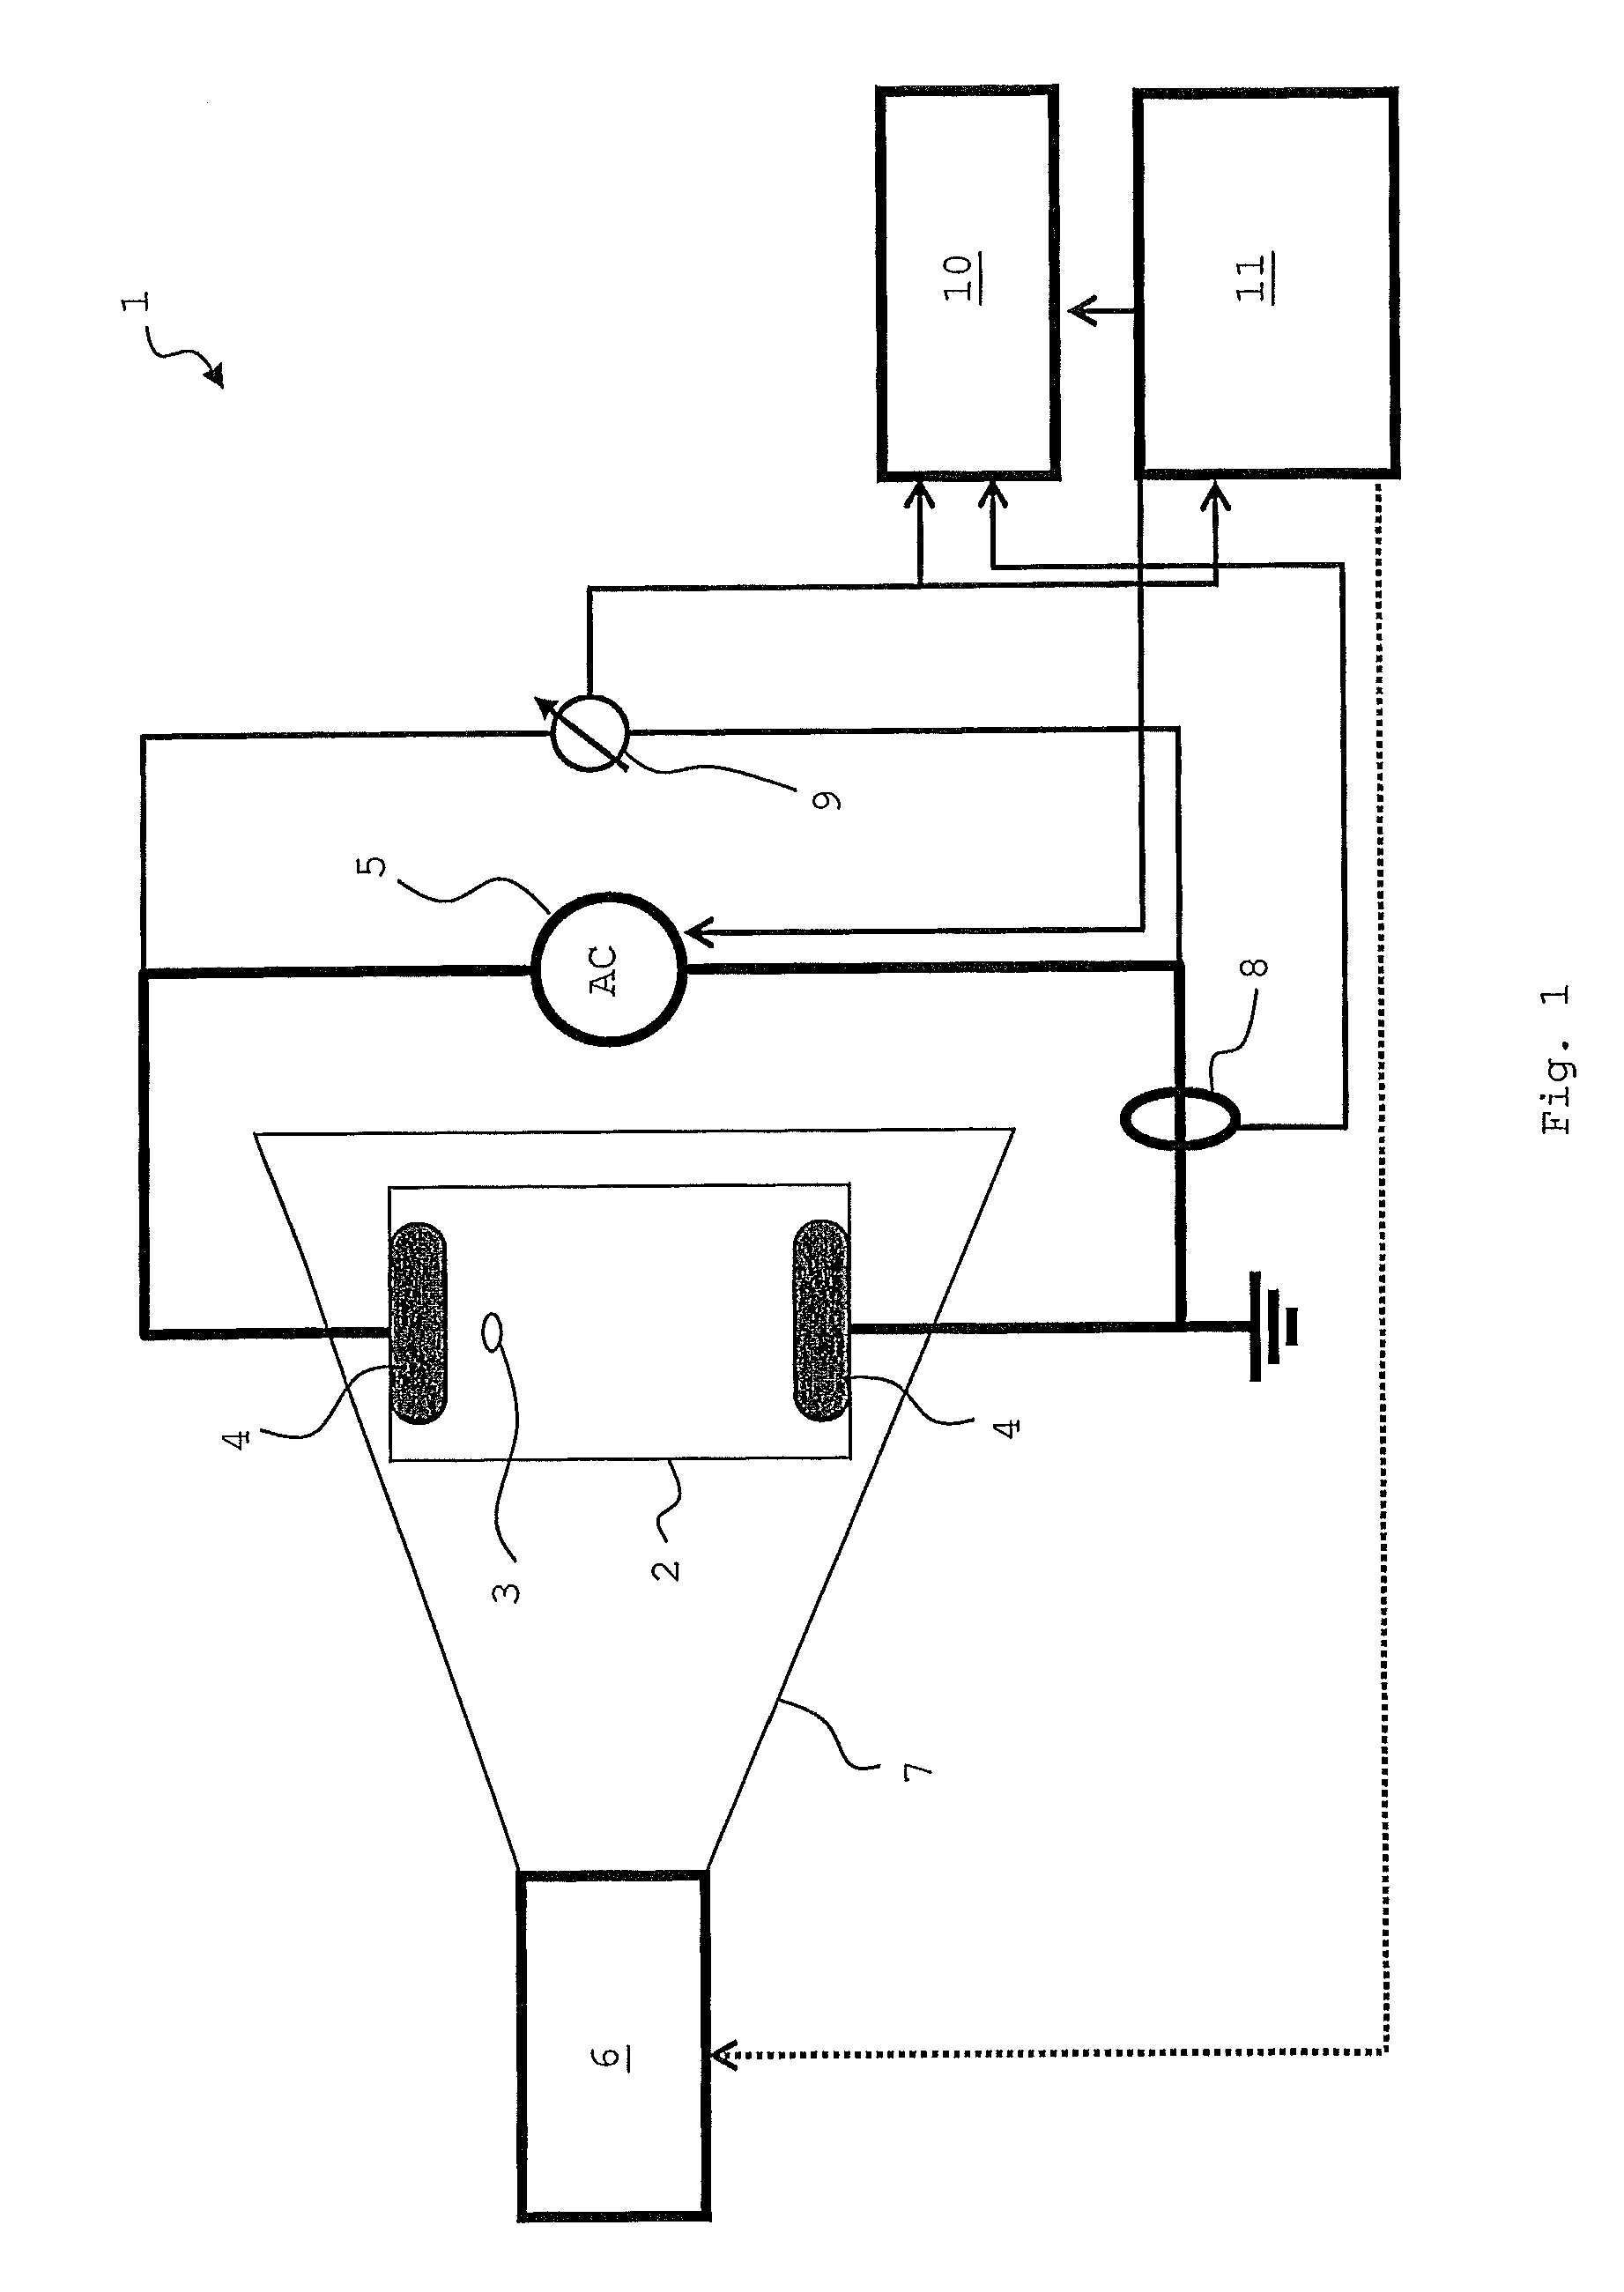 Method and system for partial discharge testing of an insulation component